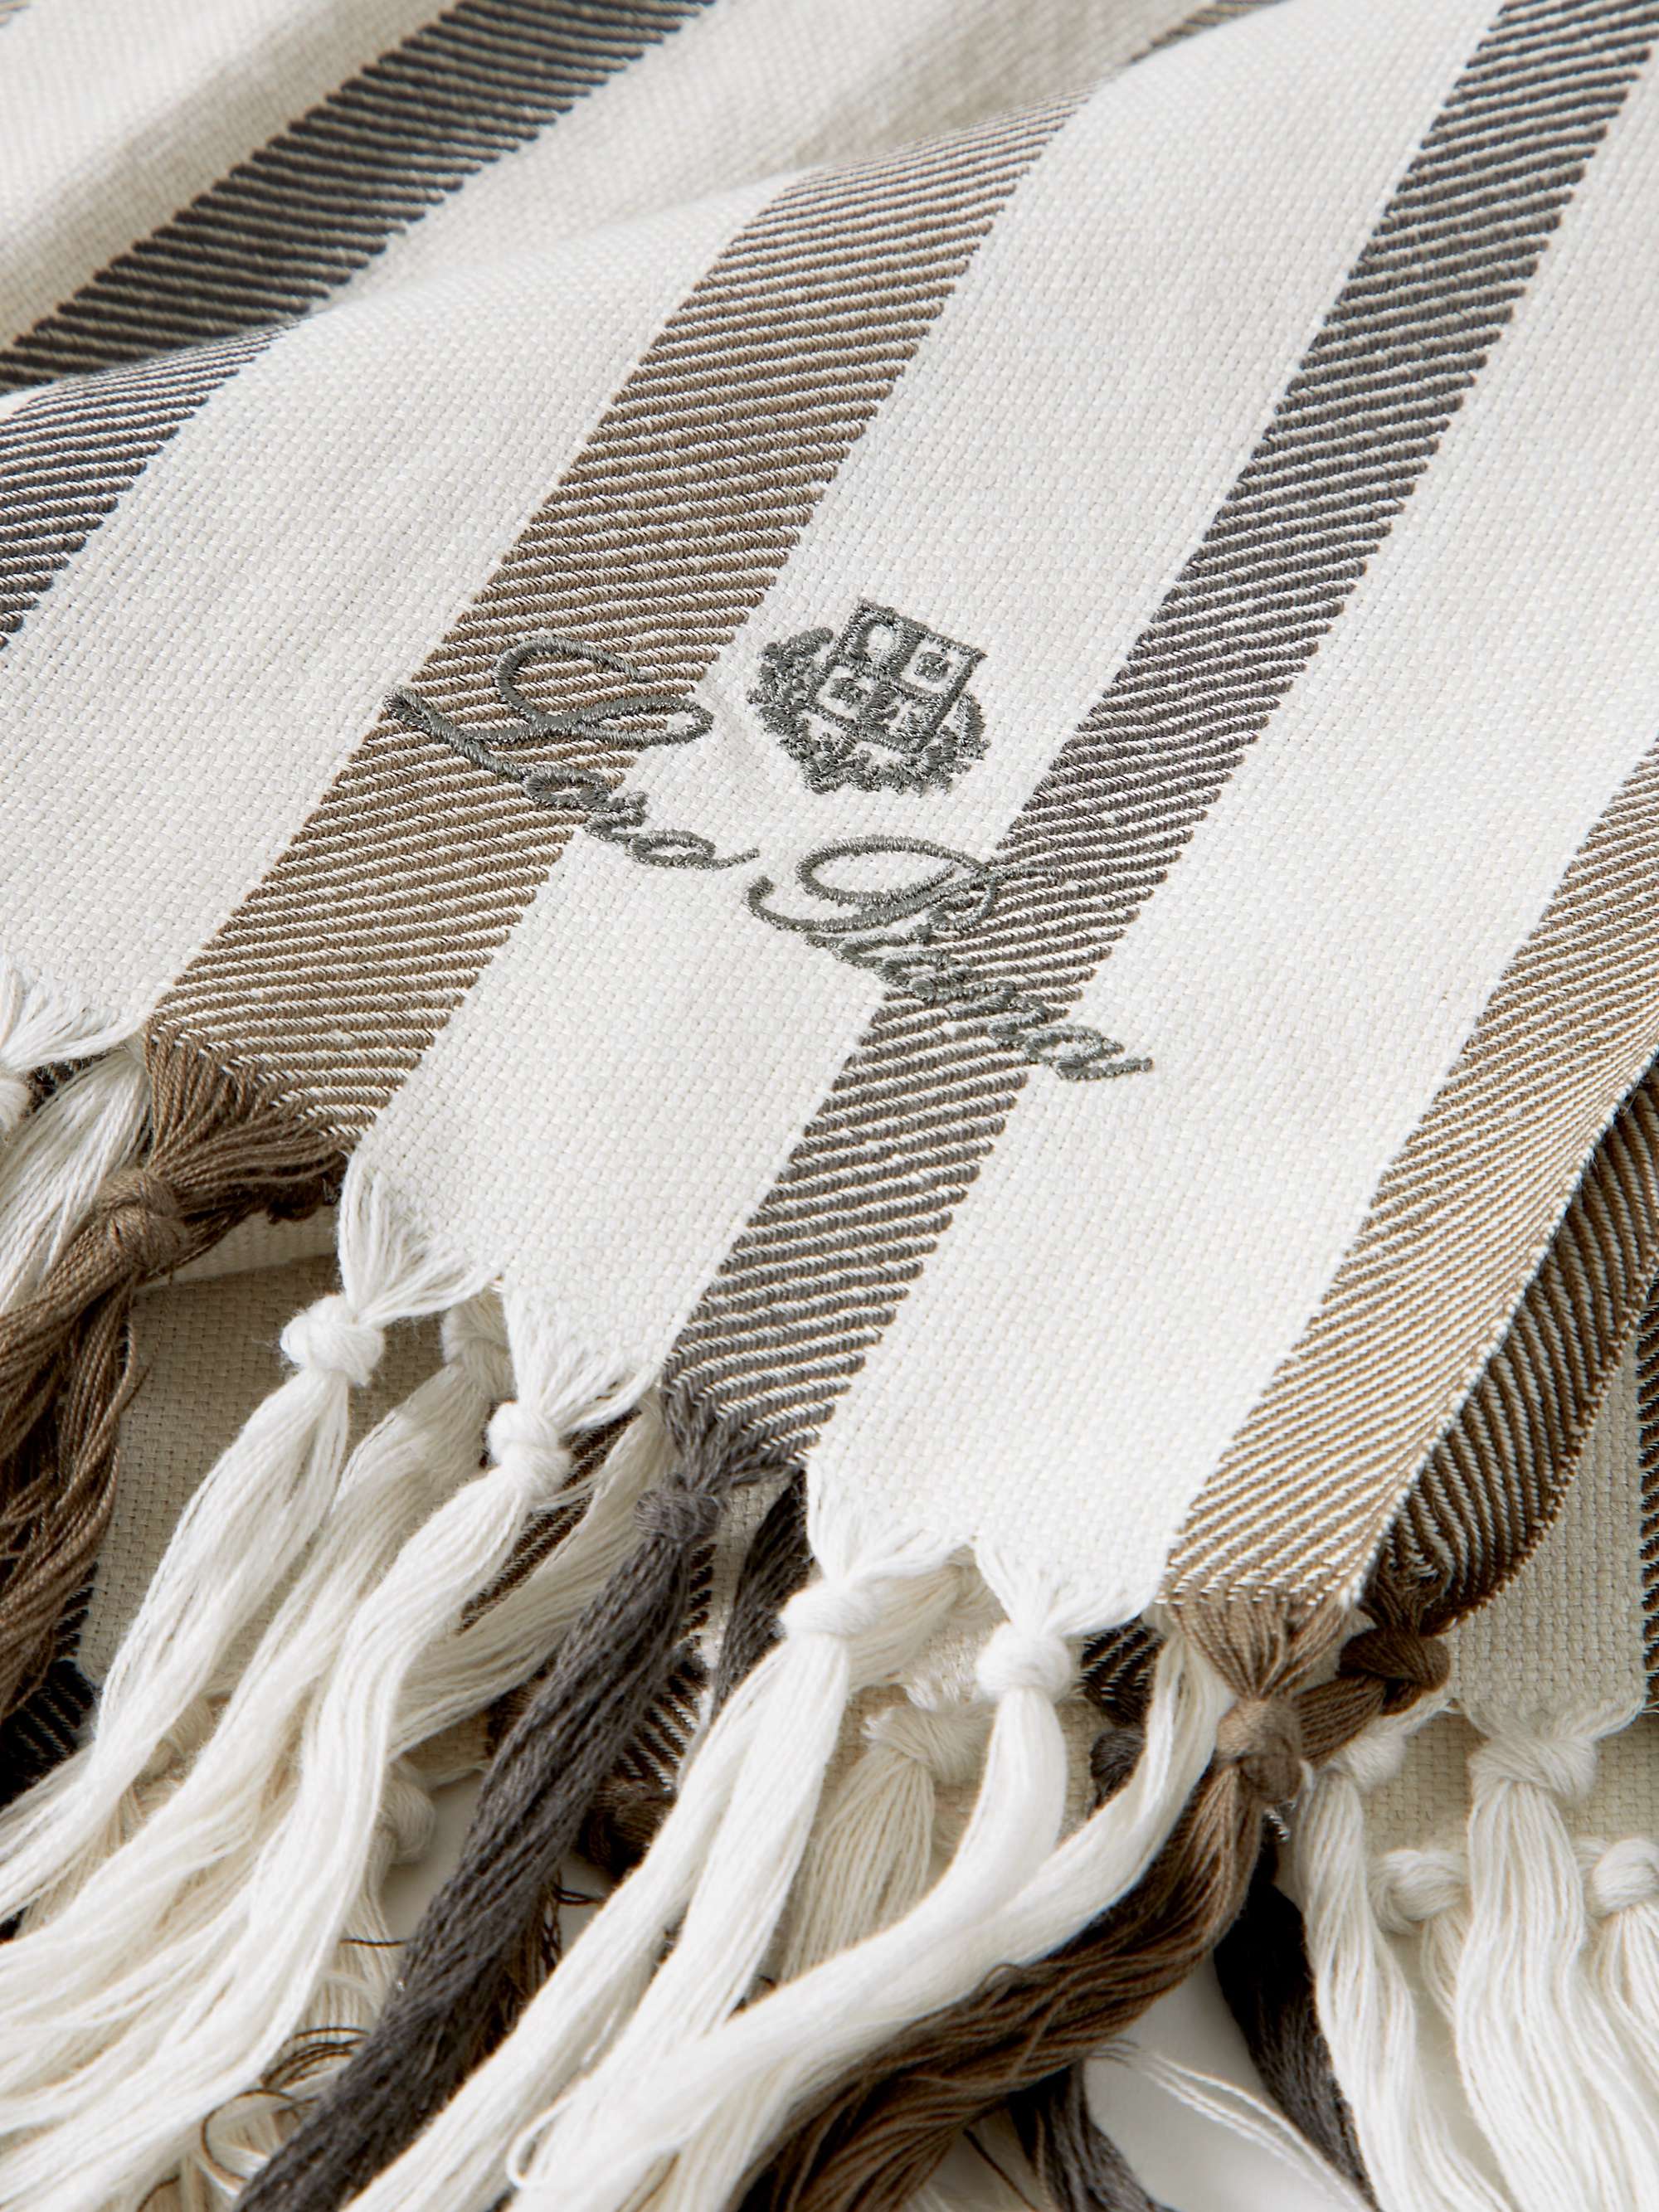 LORO PIANA Logo-Embroidered Fringed Striped Cotton and Linen-Blend Beach Towel